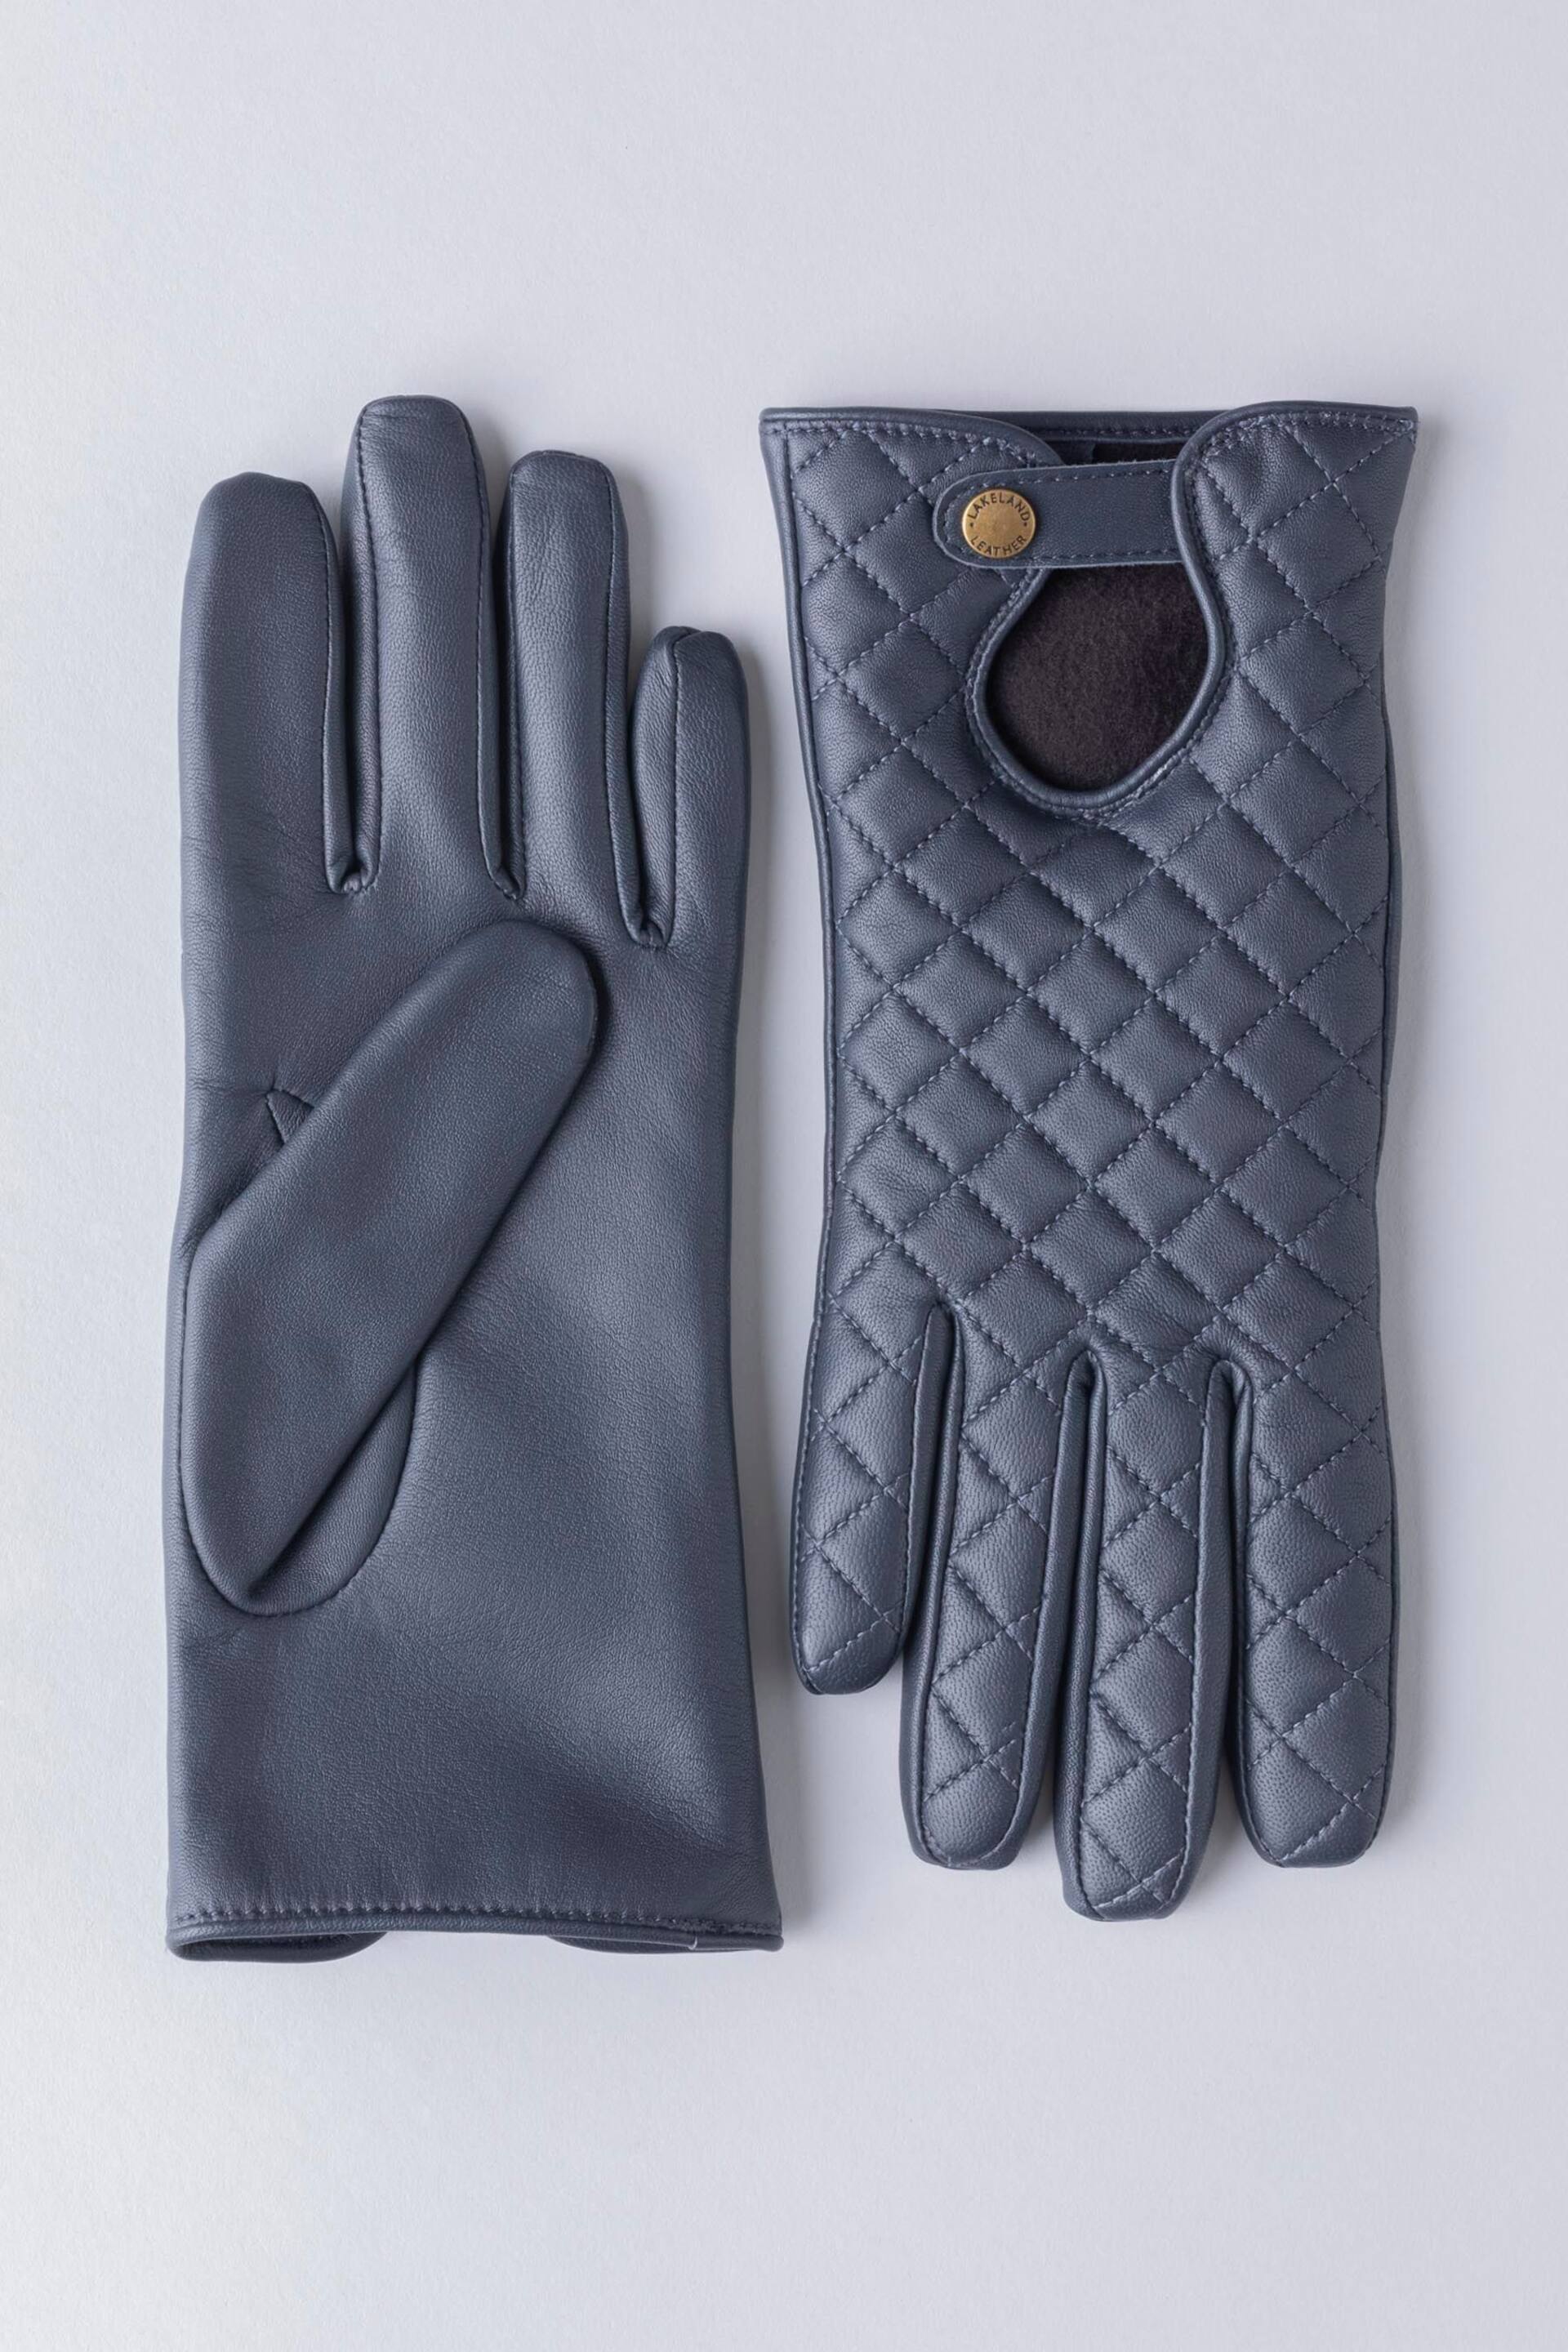 Lakeland Leather Tarn Leather Quilted Gloves - Image 1 of 3